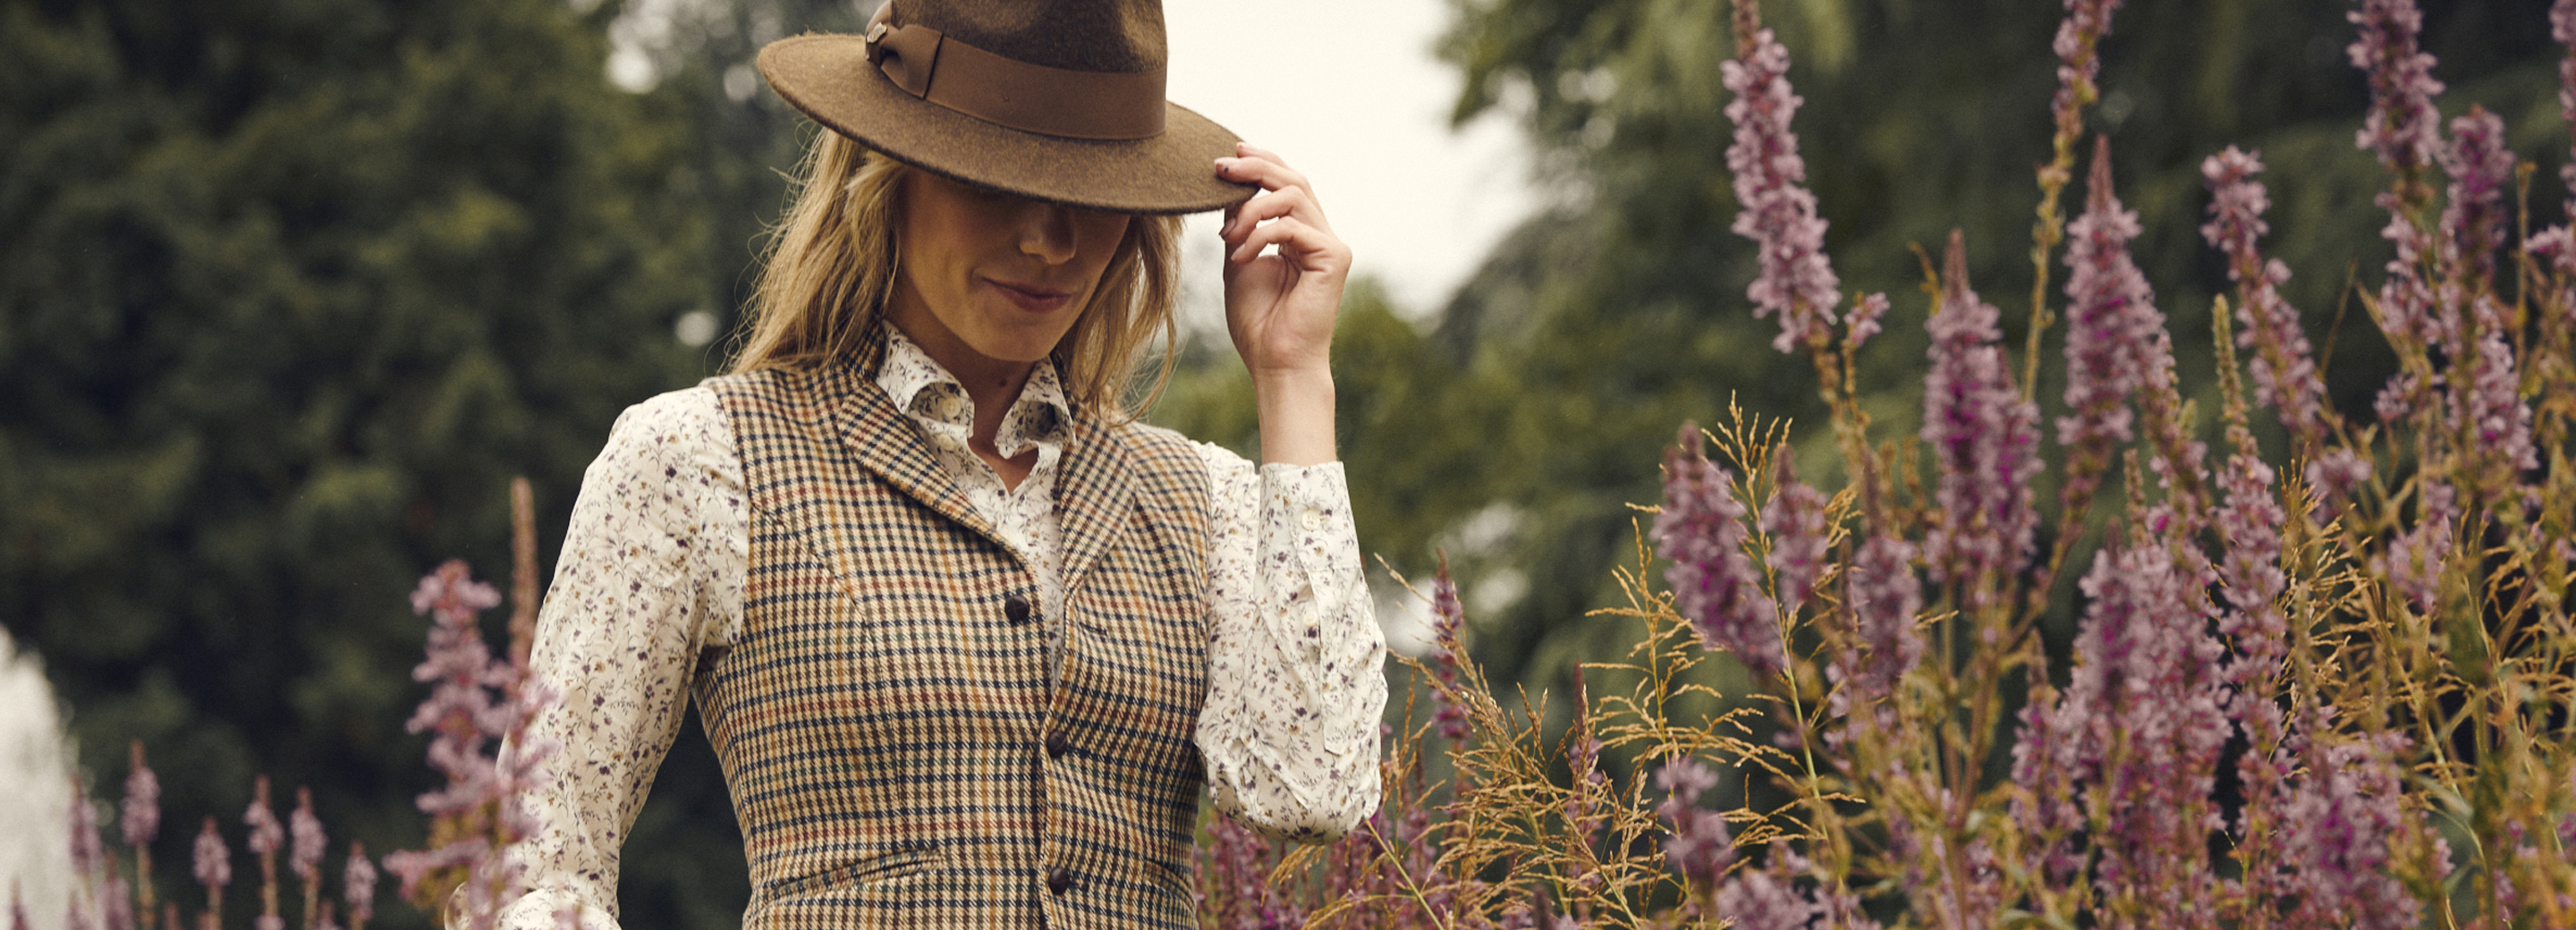 Country Outfits For Women